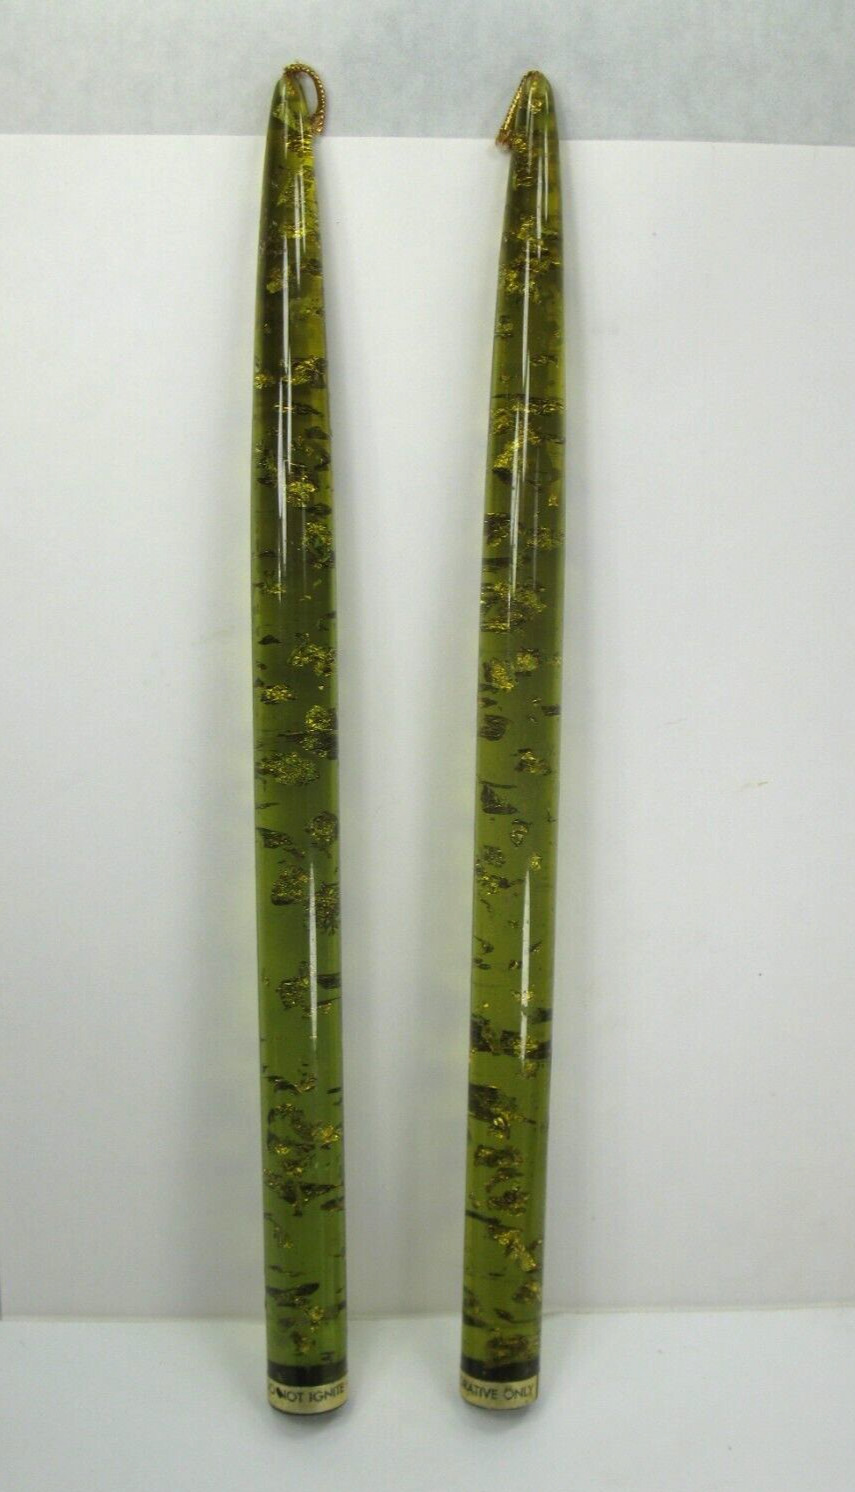 Pair of Lucite Candles Acrylic Green with Gold Flakes 12” Tapered Mid Century